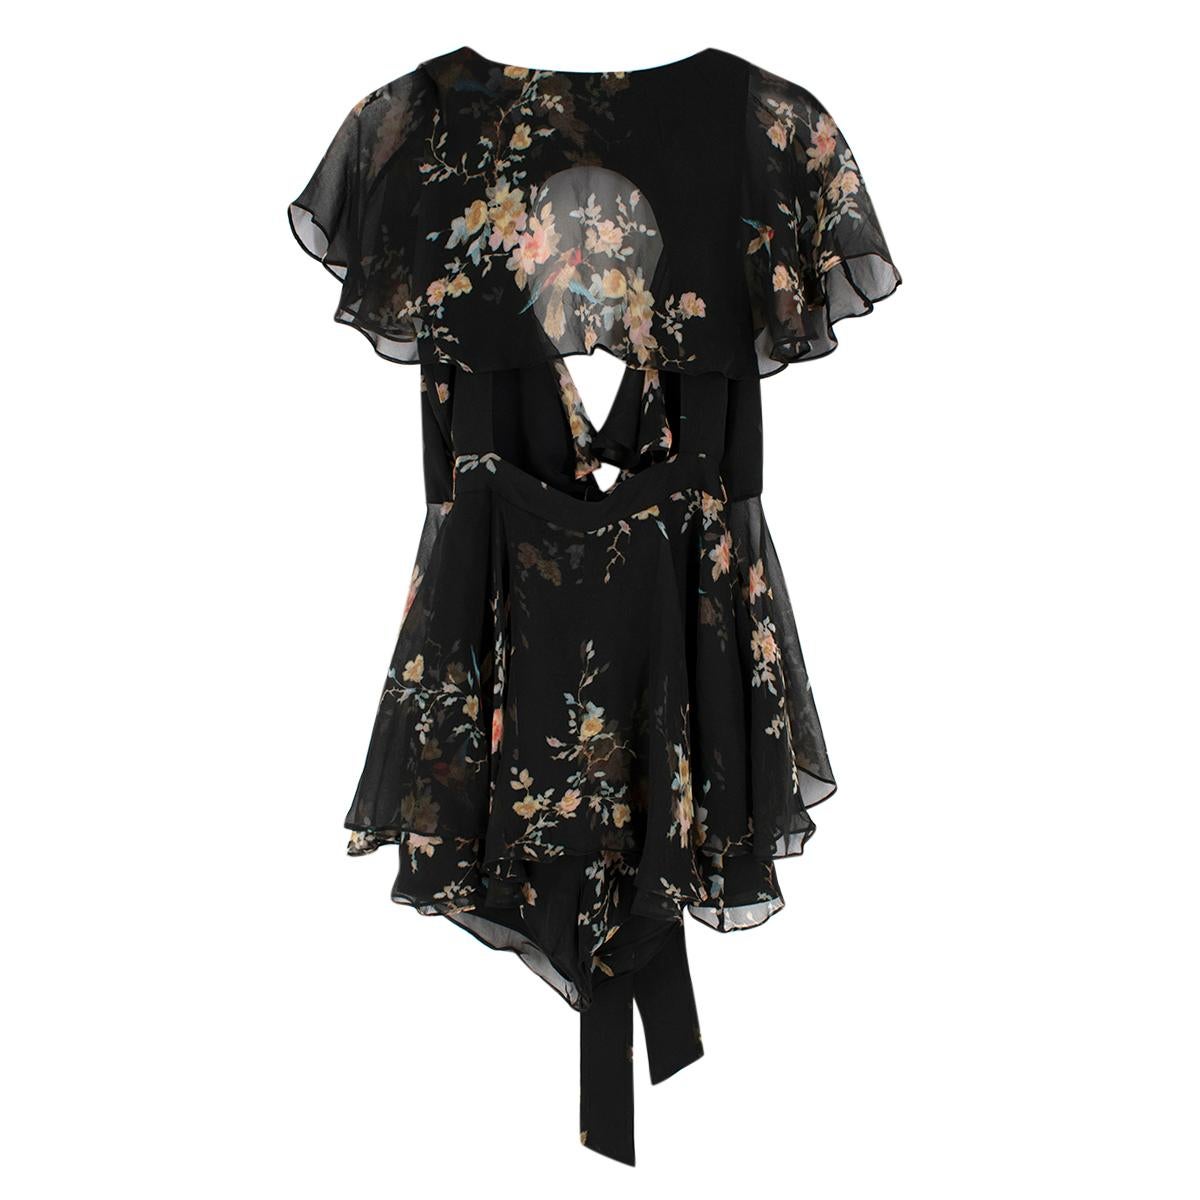 Zimmermann Maples Black Floral Silk Playsuit

Pairing flirty and fun with effortless and relaxed, this playsuit is crafted from lustrous silk base.

- Sheer flutter sleeves
- Layered shorts
- Sheer frills
- V-neckline
- Self-tie waist

Materials: